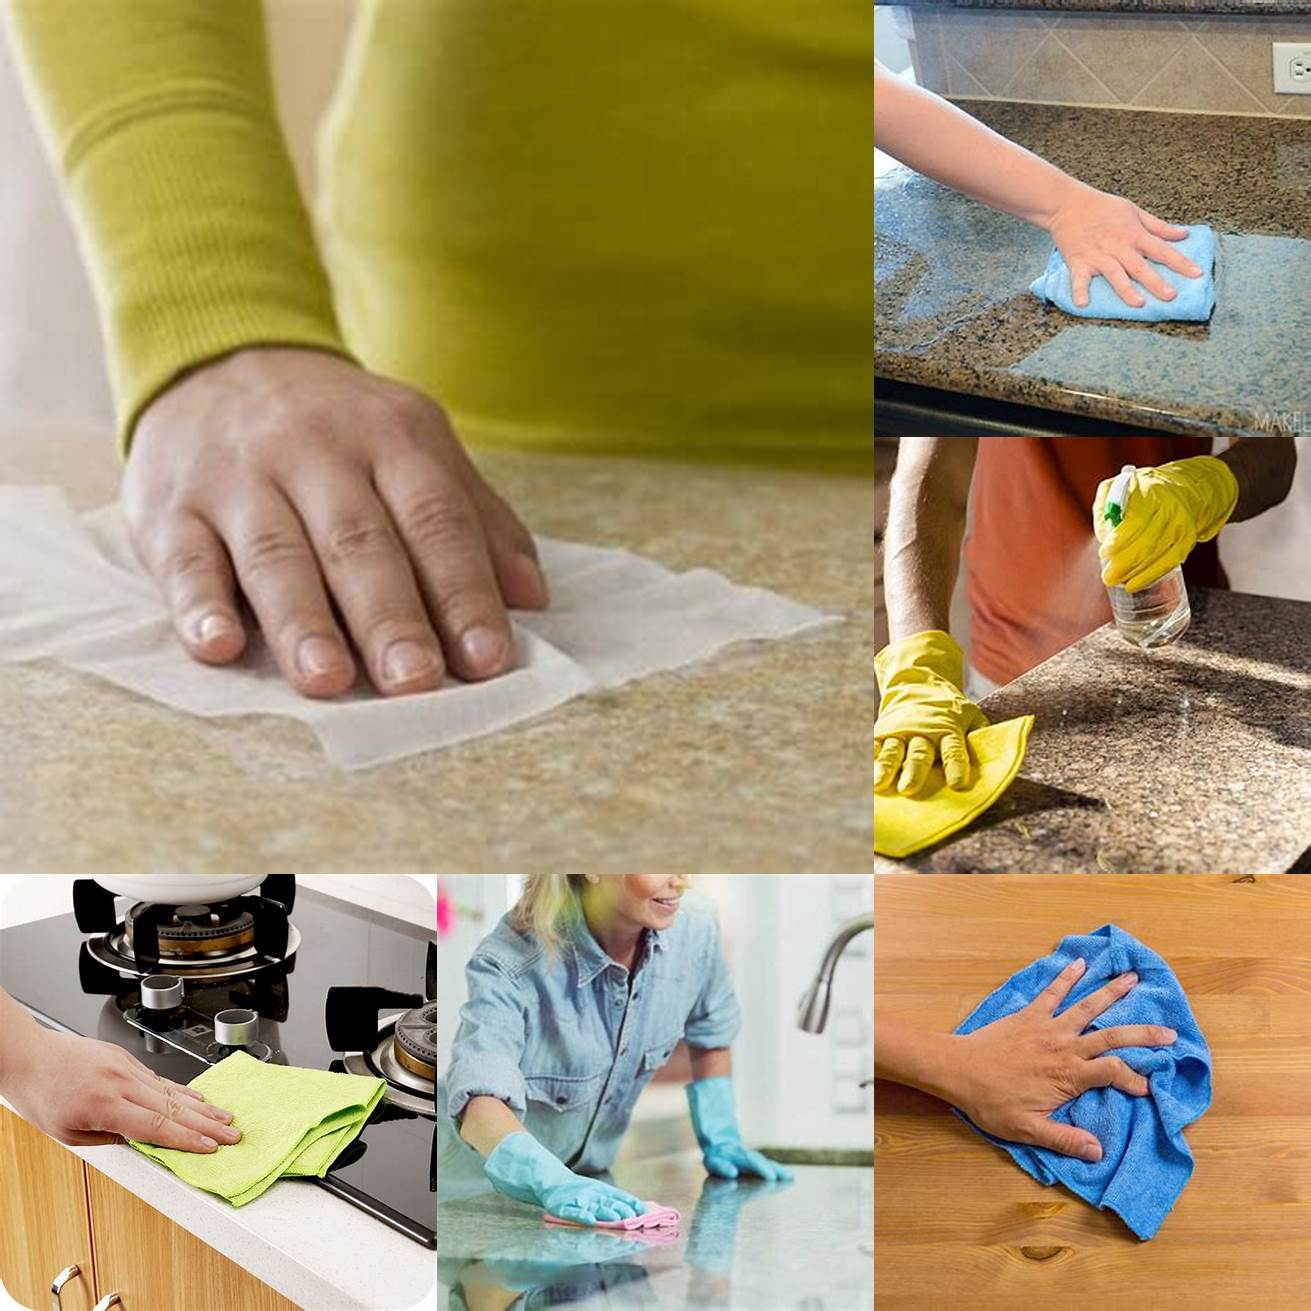 Wipe the countertop and sink regularly with a soft cloth and mild soap or cleaner Avoid using abrasive or acidic cleaners that can damage the surface